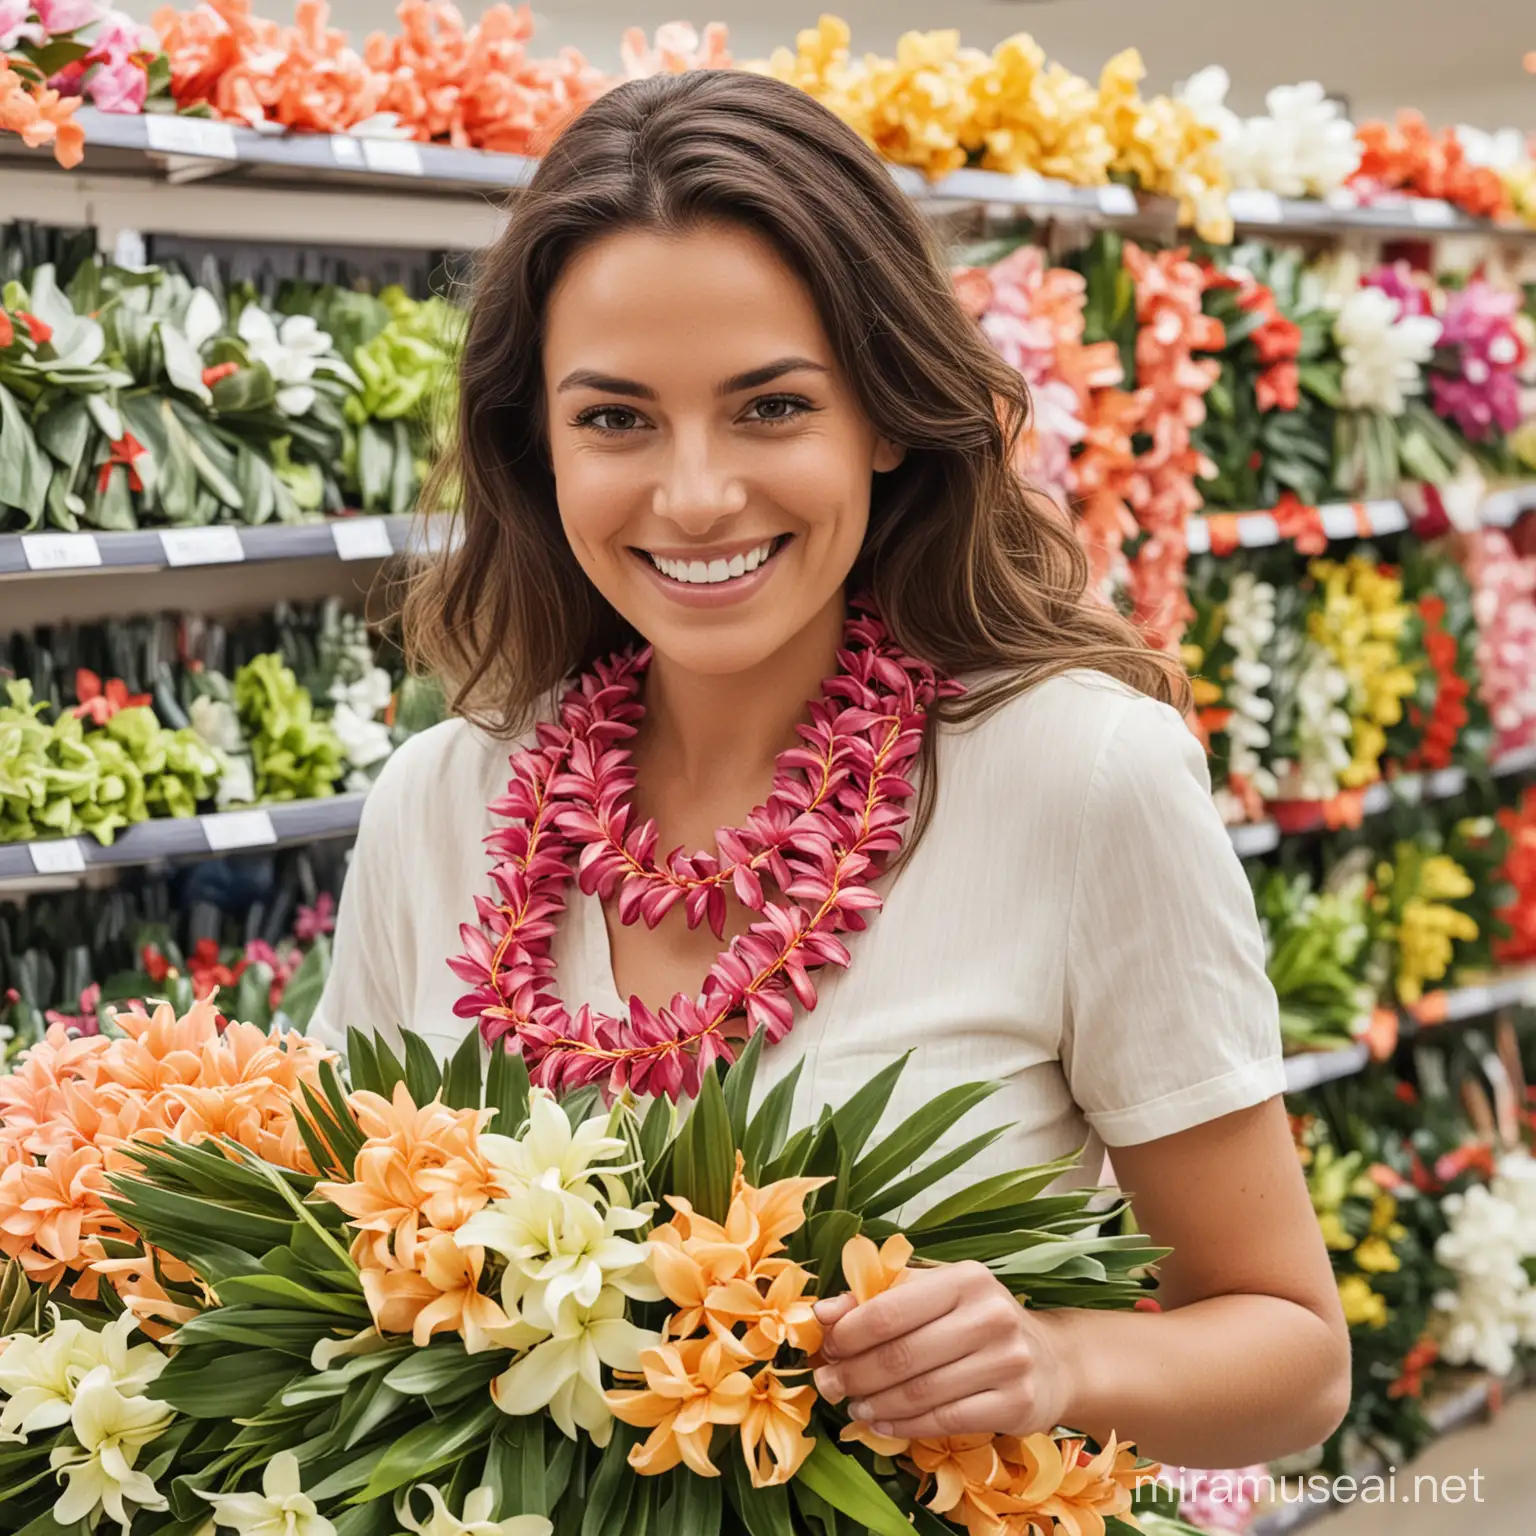 smiling woman shopping with leis